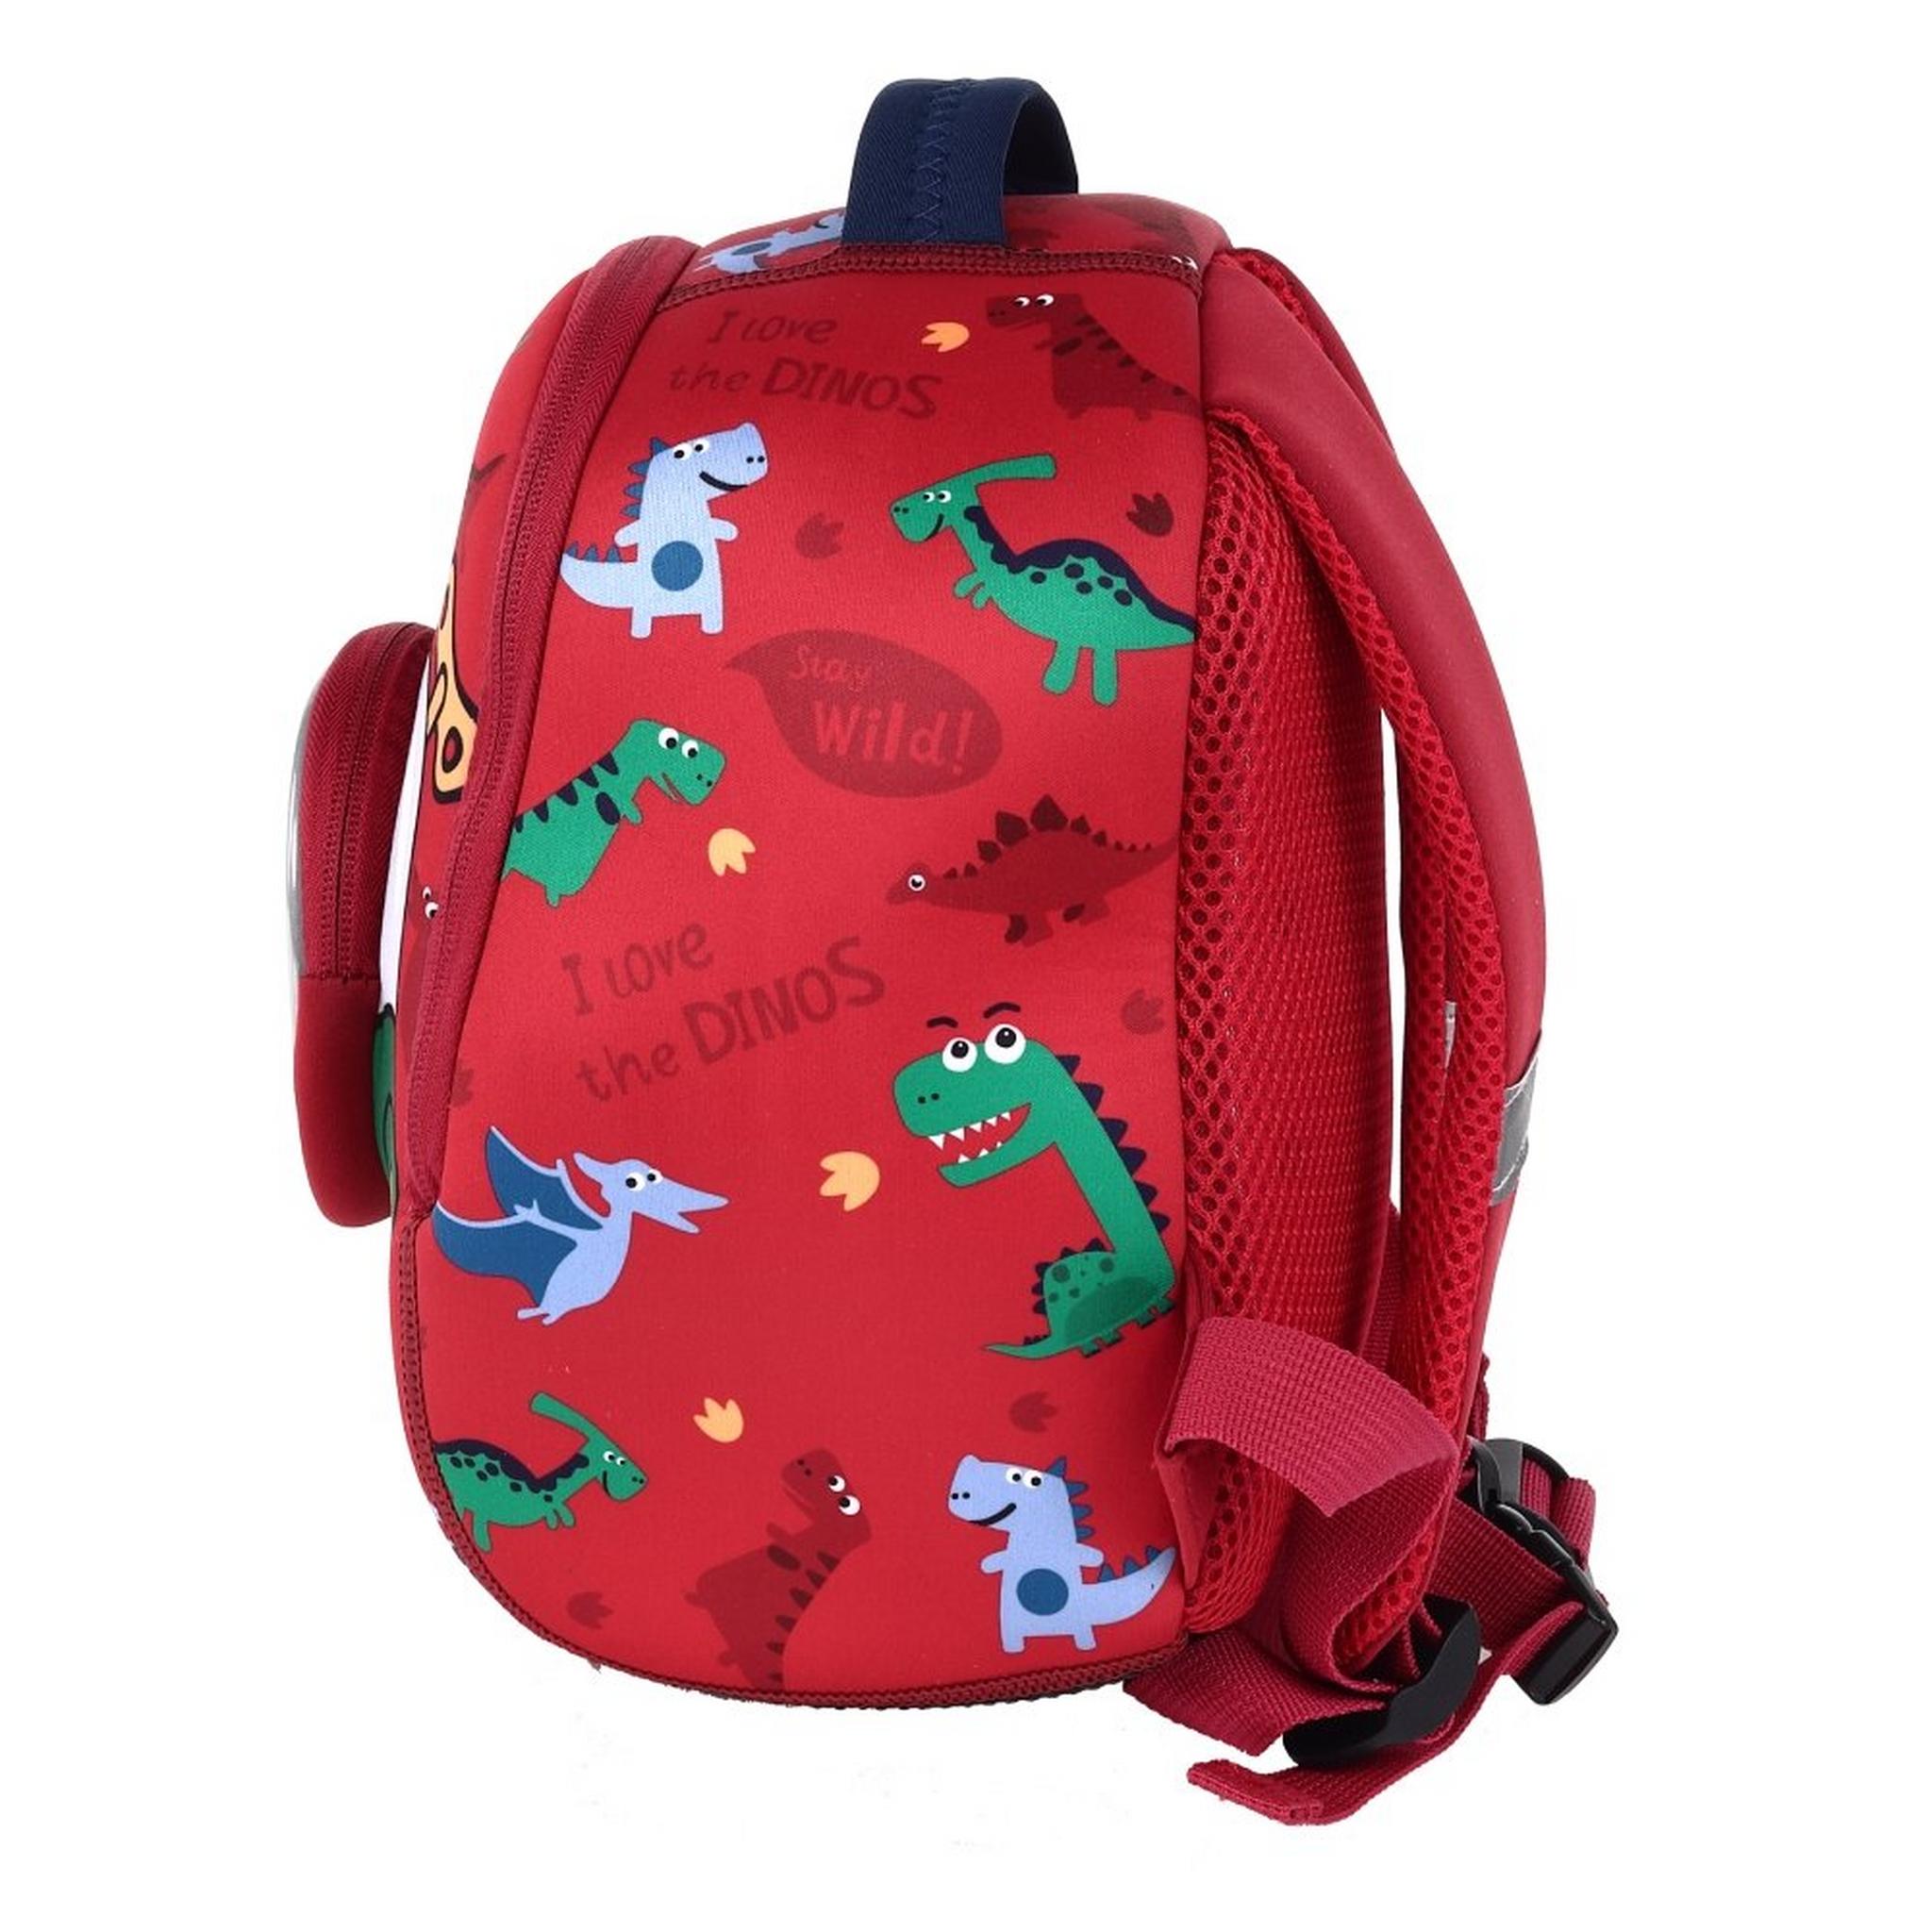 EQ Kids 3in1 Dino Small Backpack - Red